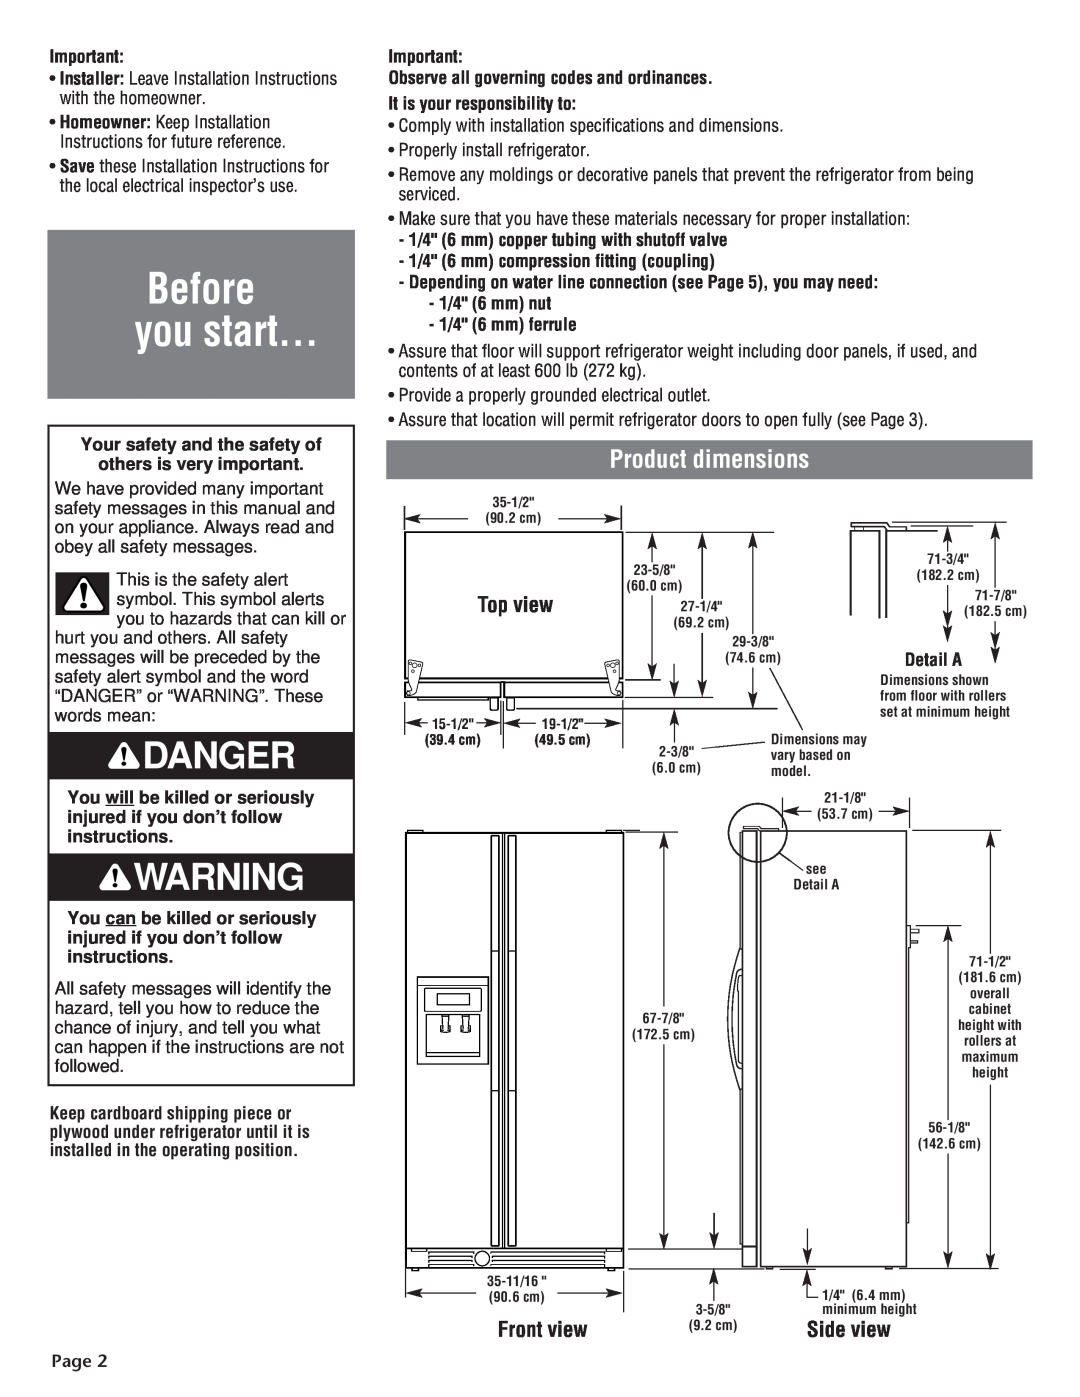 KitchenAid 2210725 manual Before you start, Danger, Product dimensions, Top view, Front view, Side view, Page 